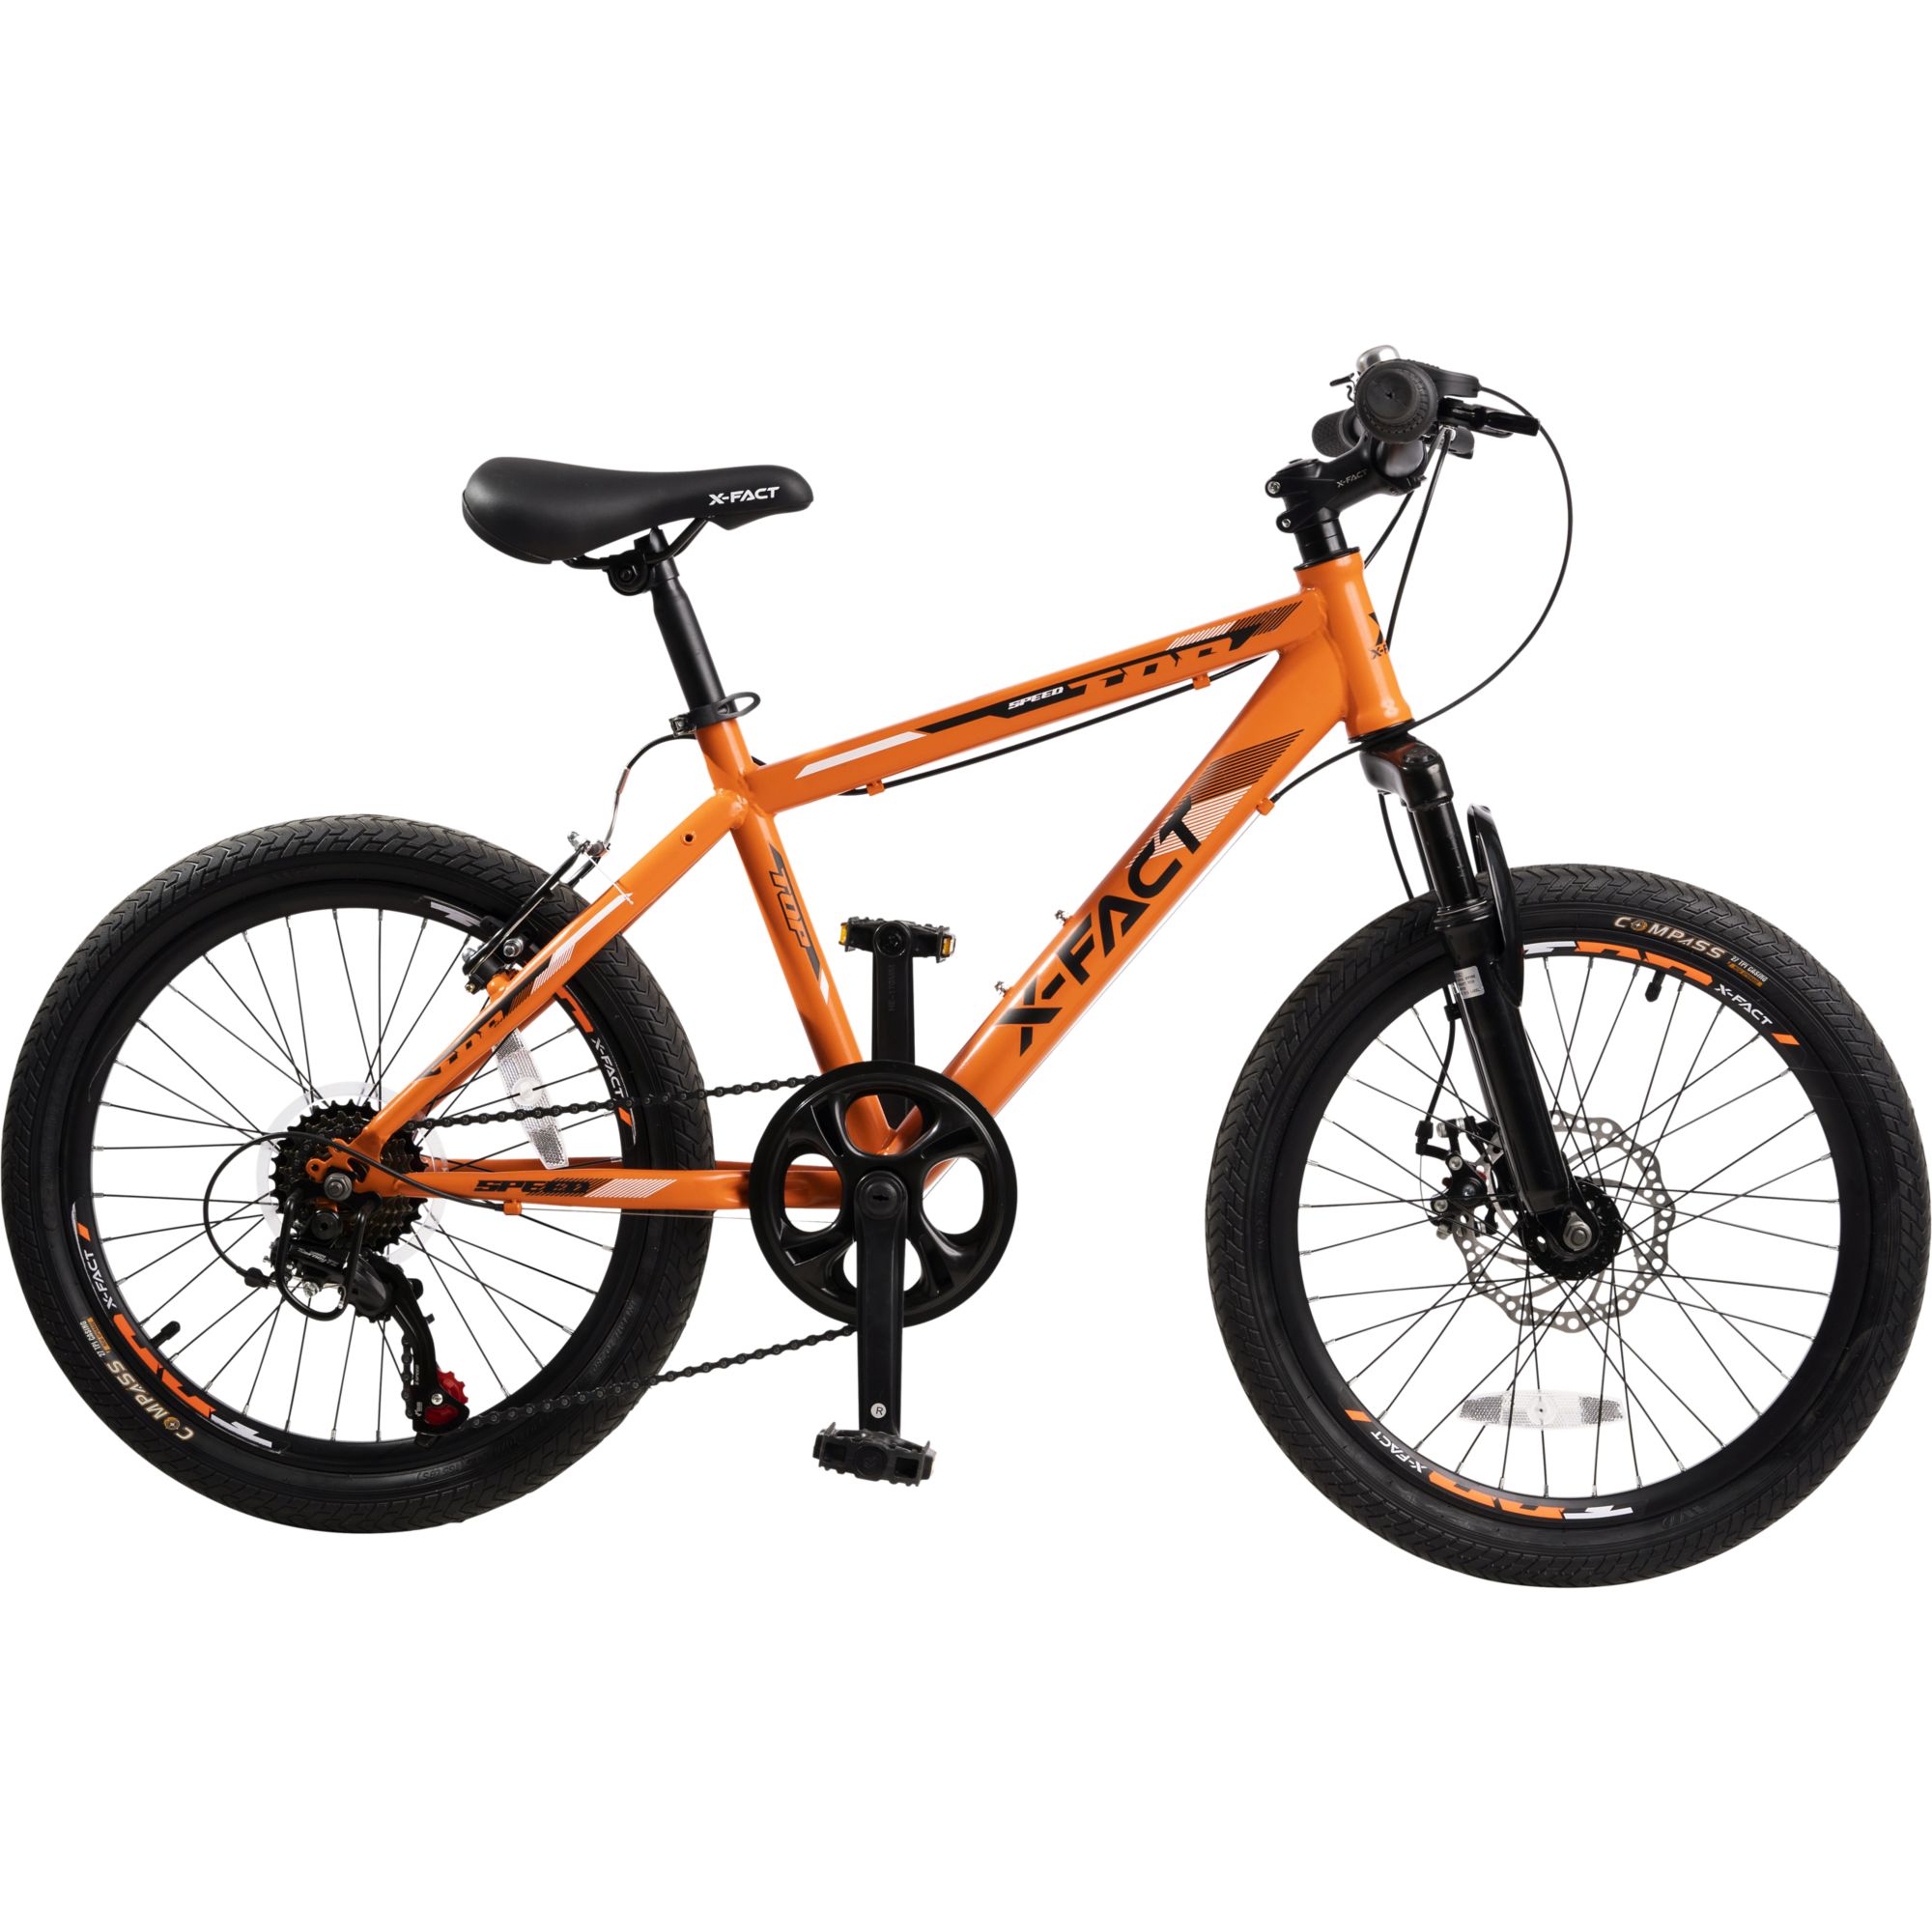 Rookie 20 inch biciclete